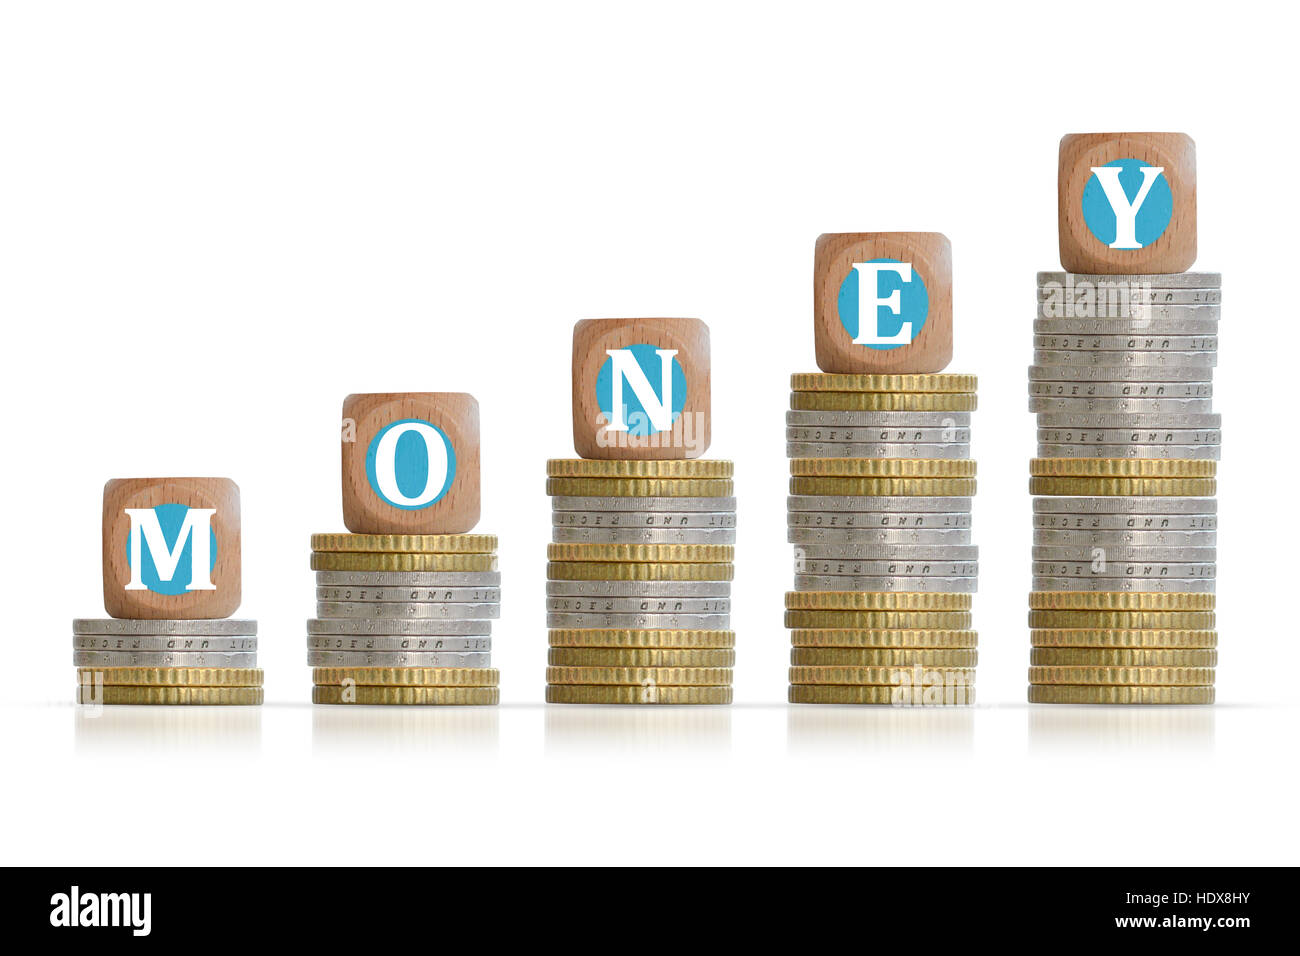 Make money concept with coins ladder and wooden cubes Stock Photo